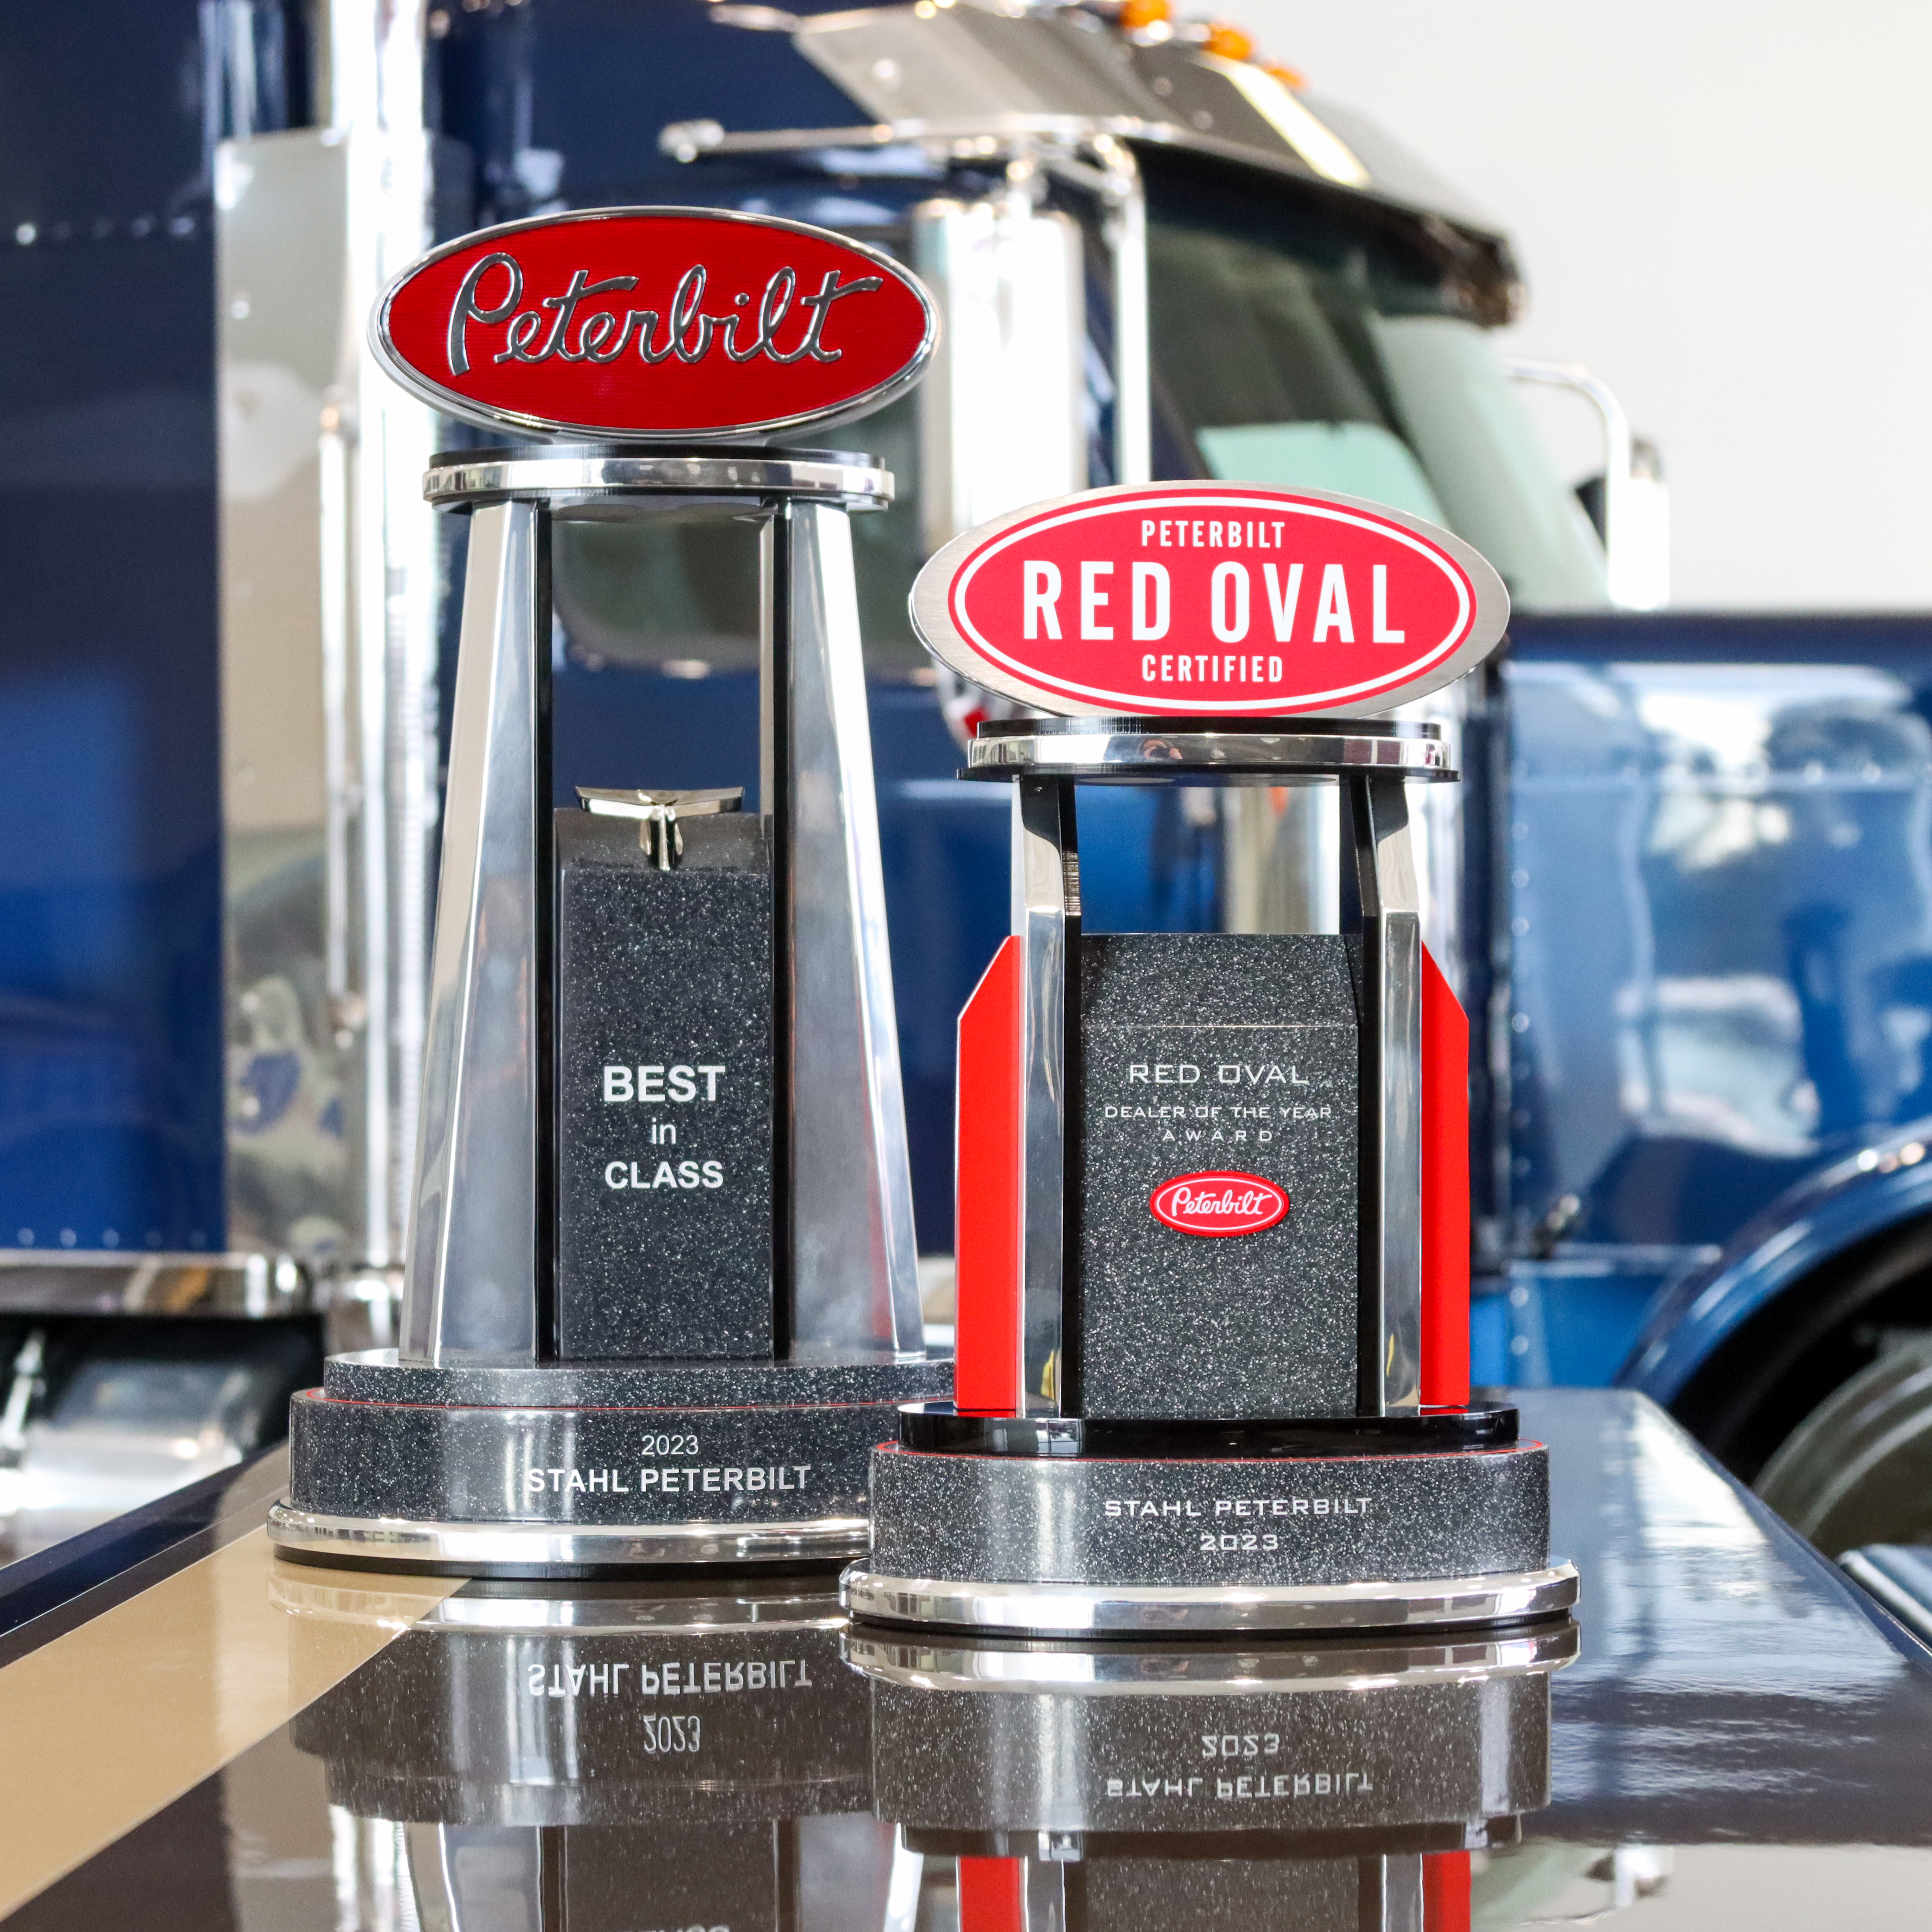 Best In Class and Red Oval Dealer of the Year 2023 awards